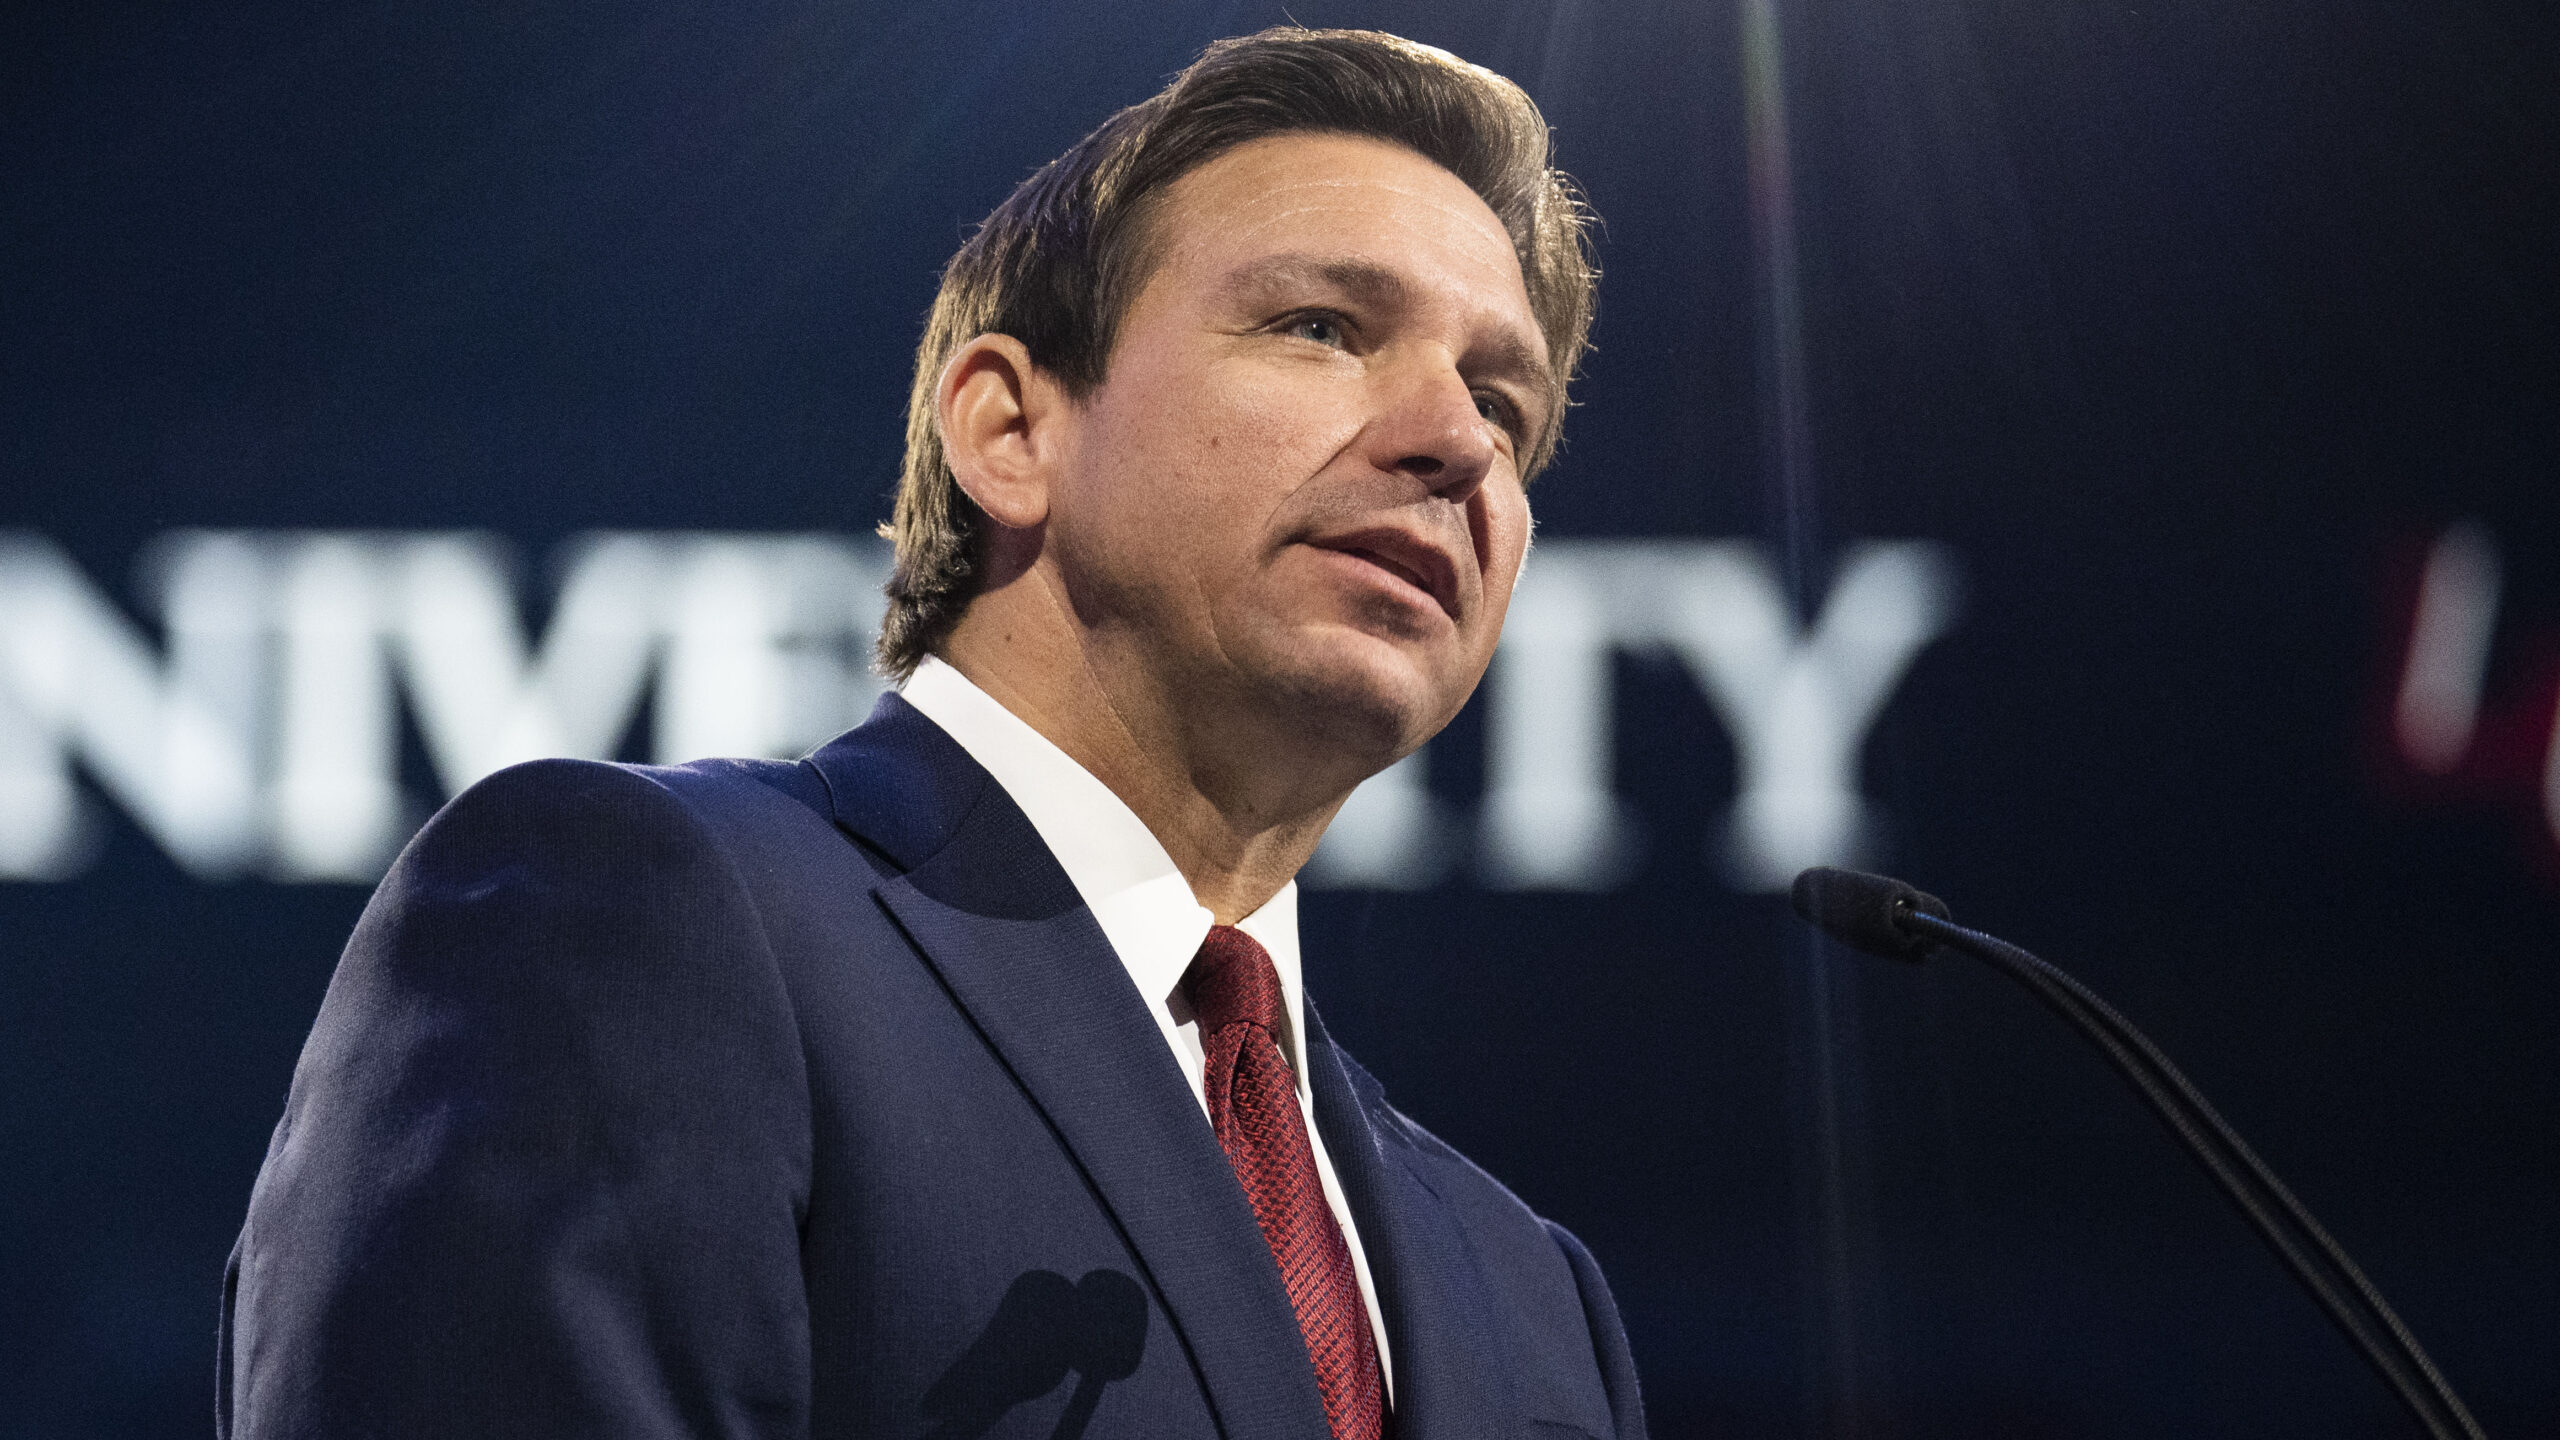 DeSantis Signs New ‘Law-And-Order’ Bills That Allows The Death Penalty For Pedophiles